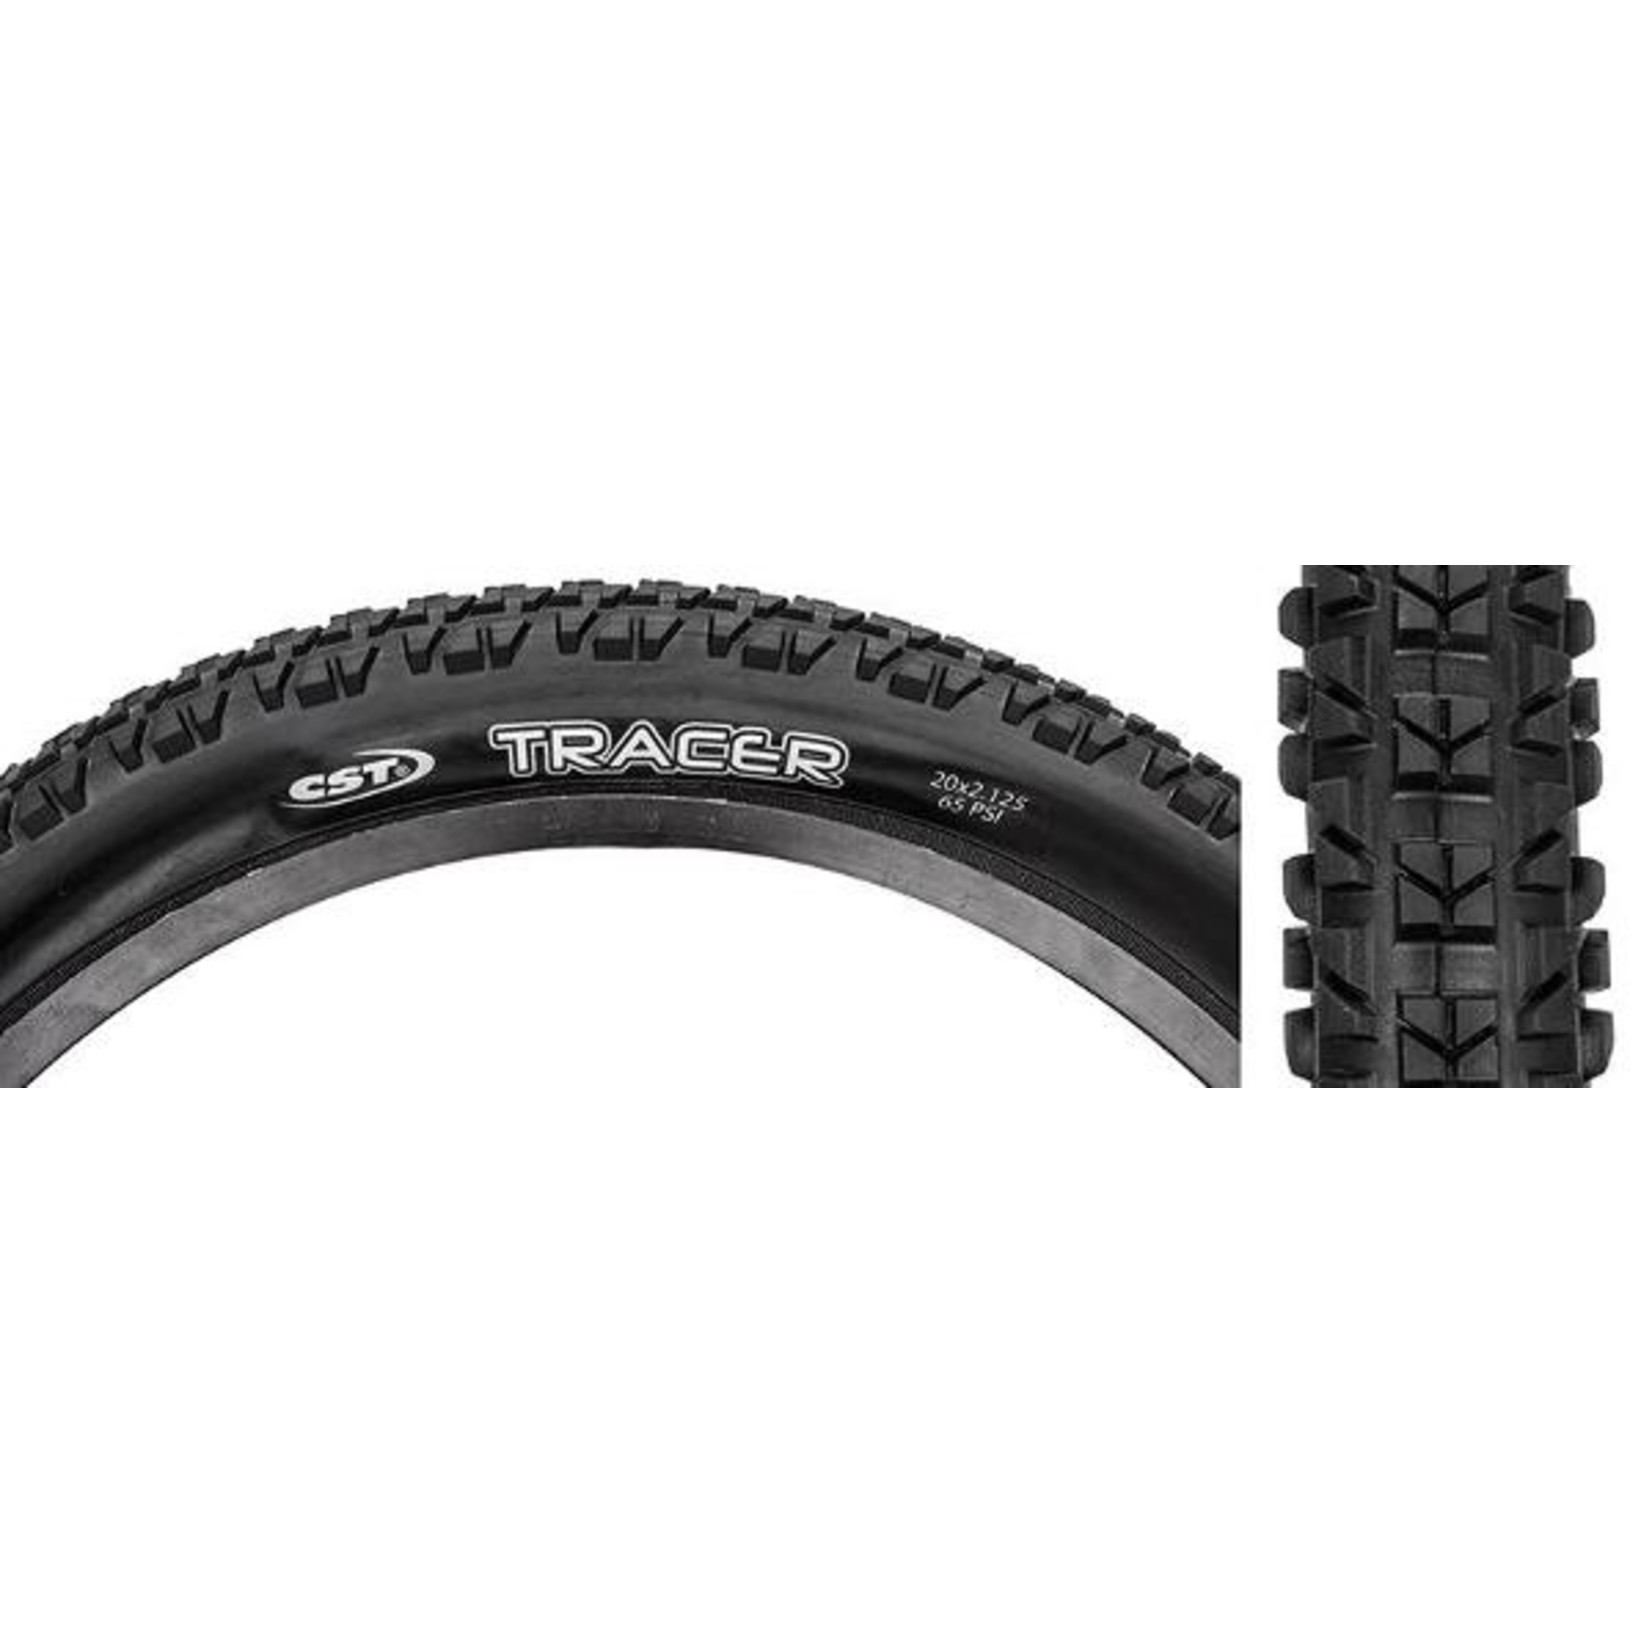 CST CST Bike Tyre - Tracer - 24 X 1.95 - Black Wirebead Tracer - C1751 - Pair